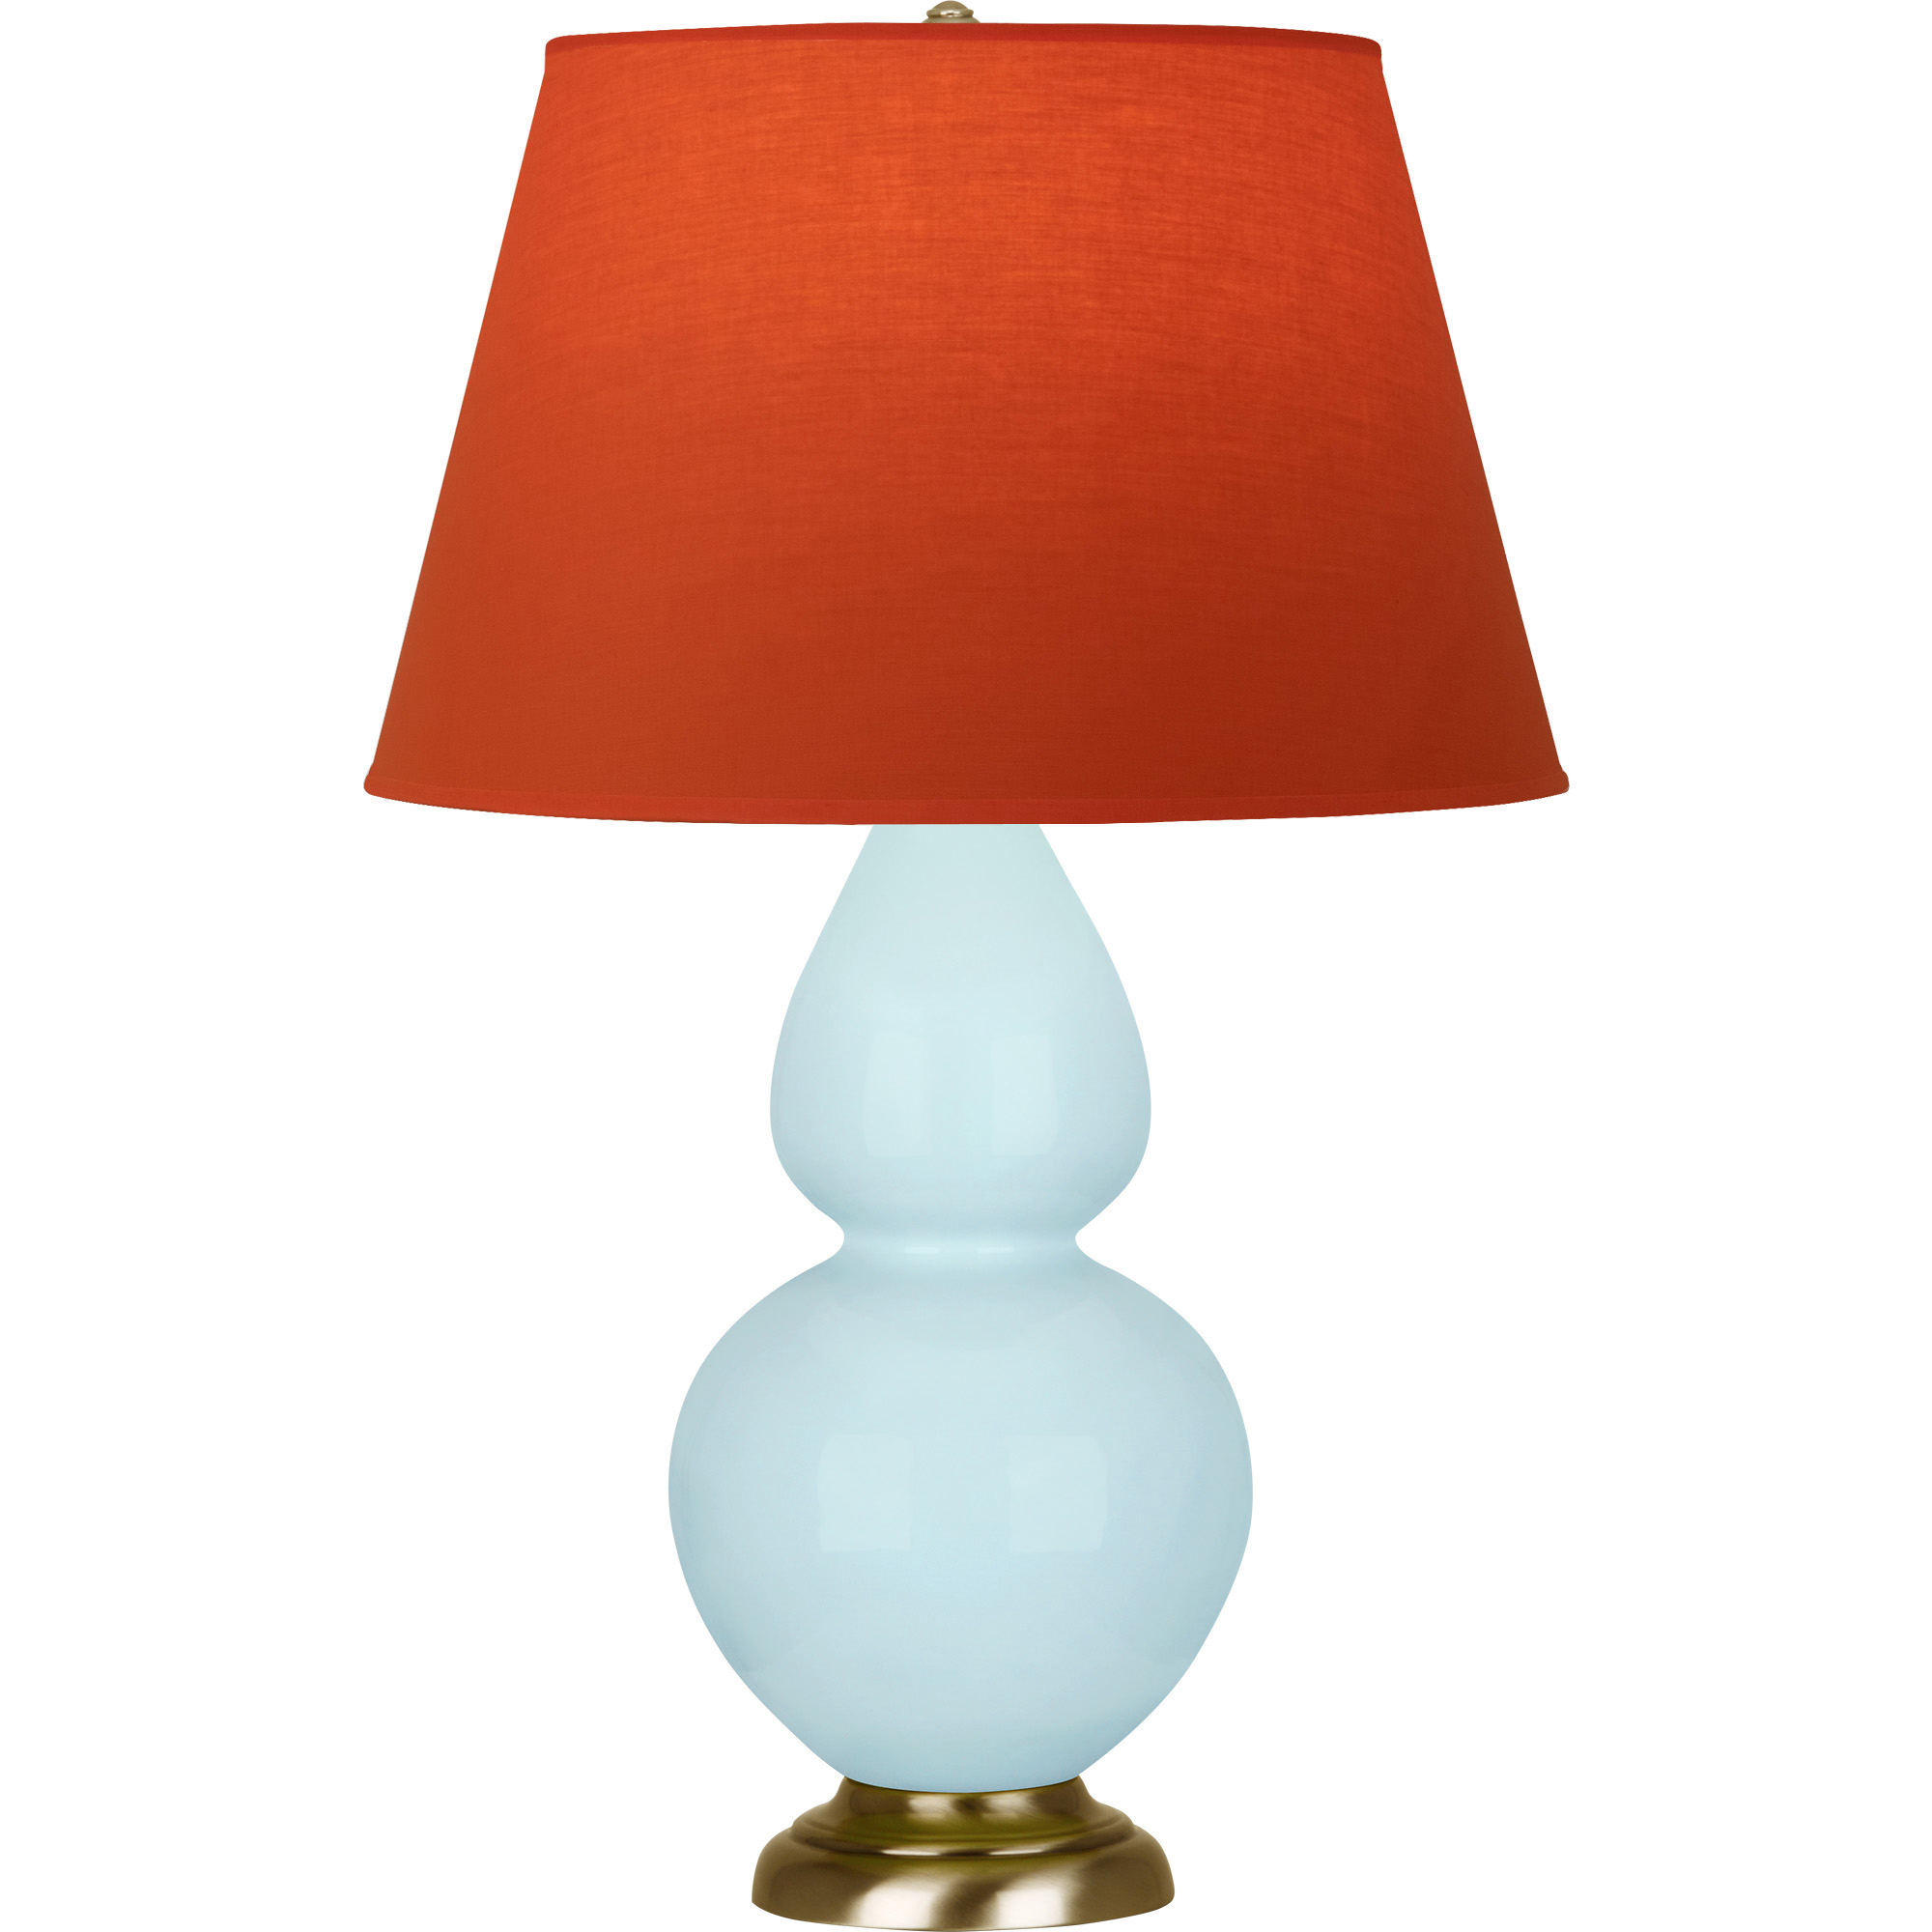 Double Gourd Table Lamp Style #1666T